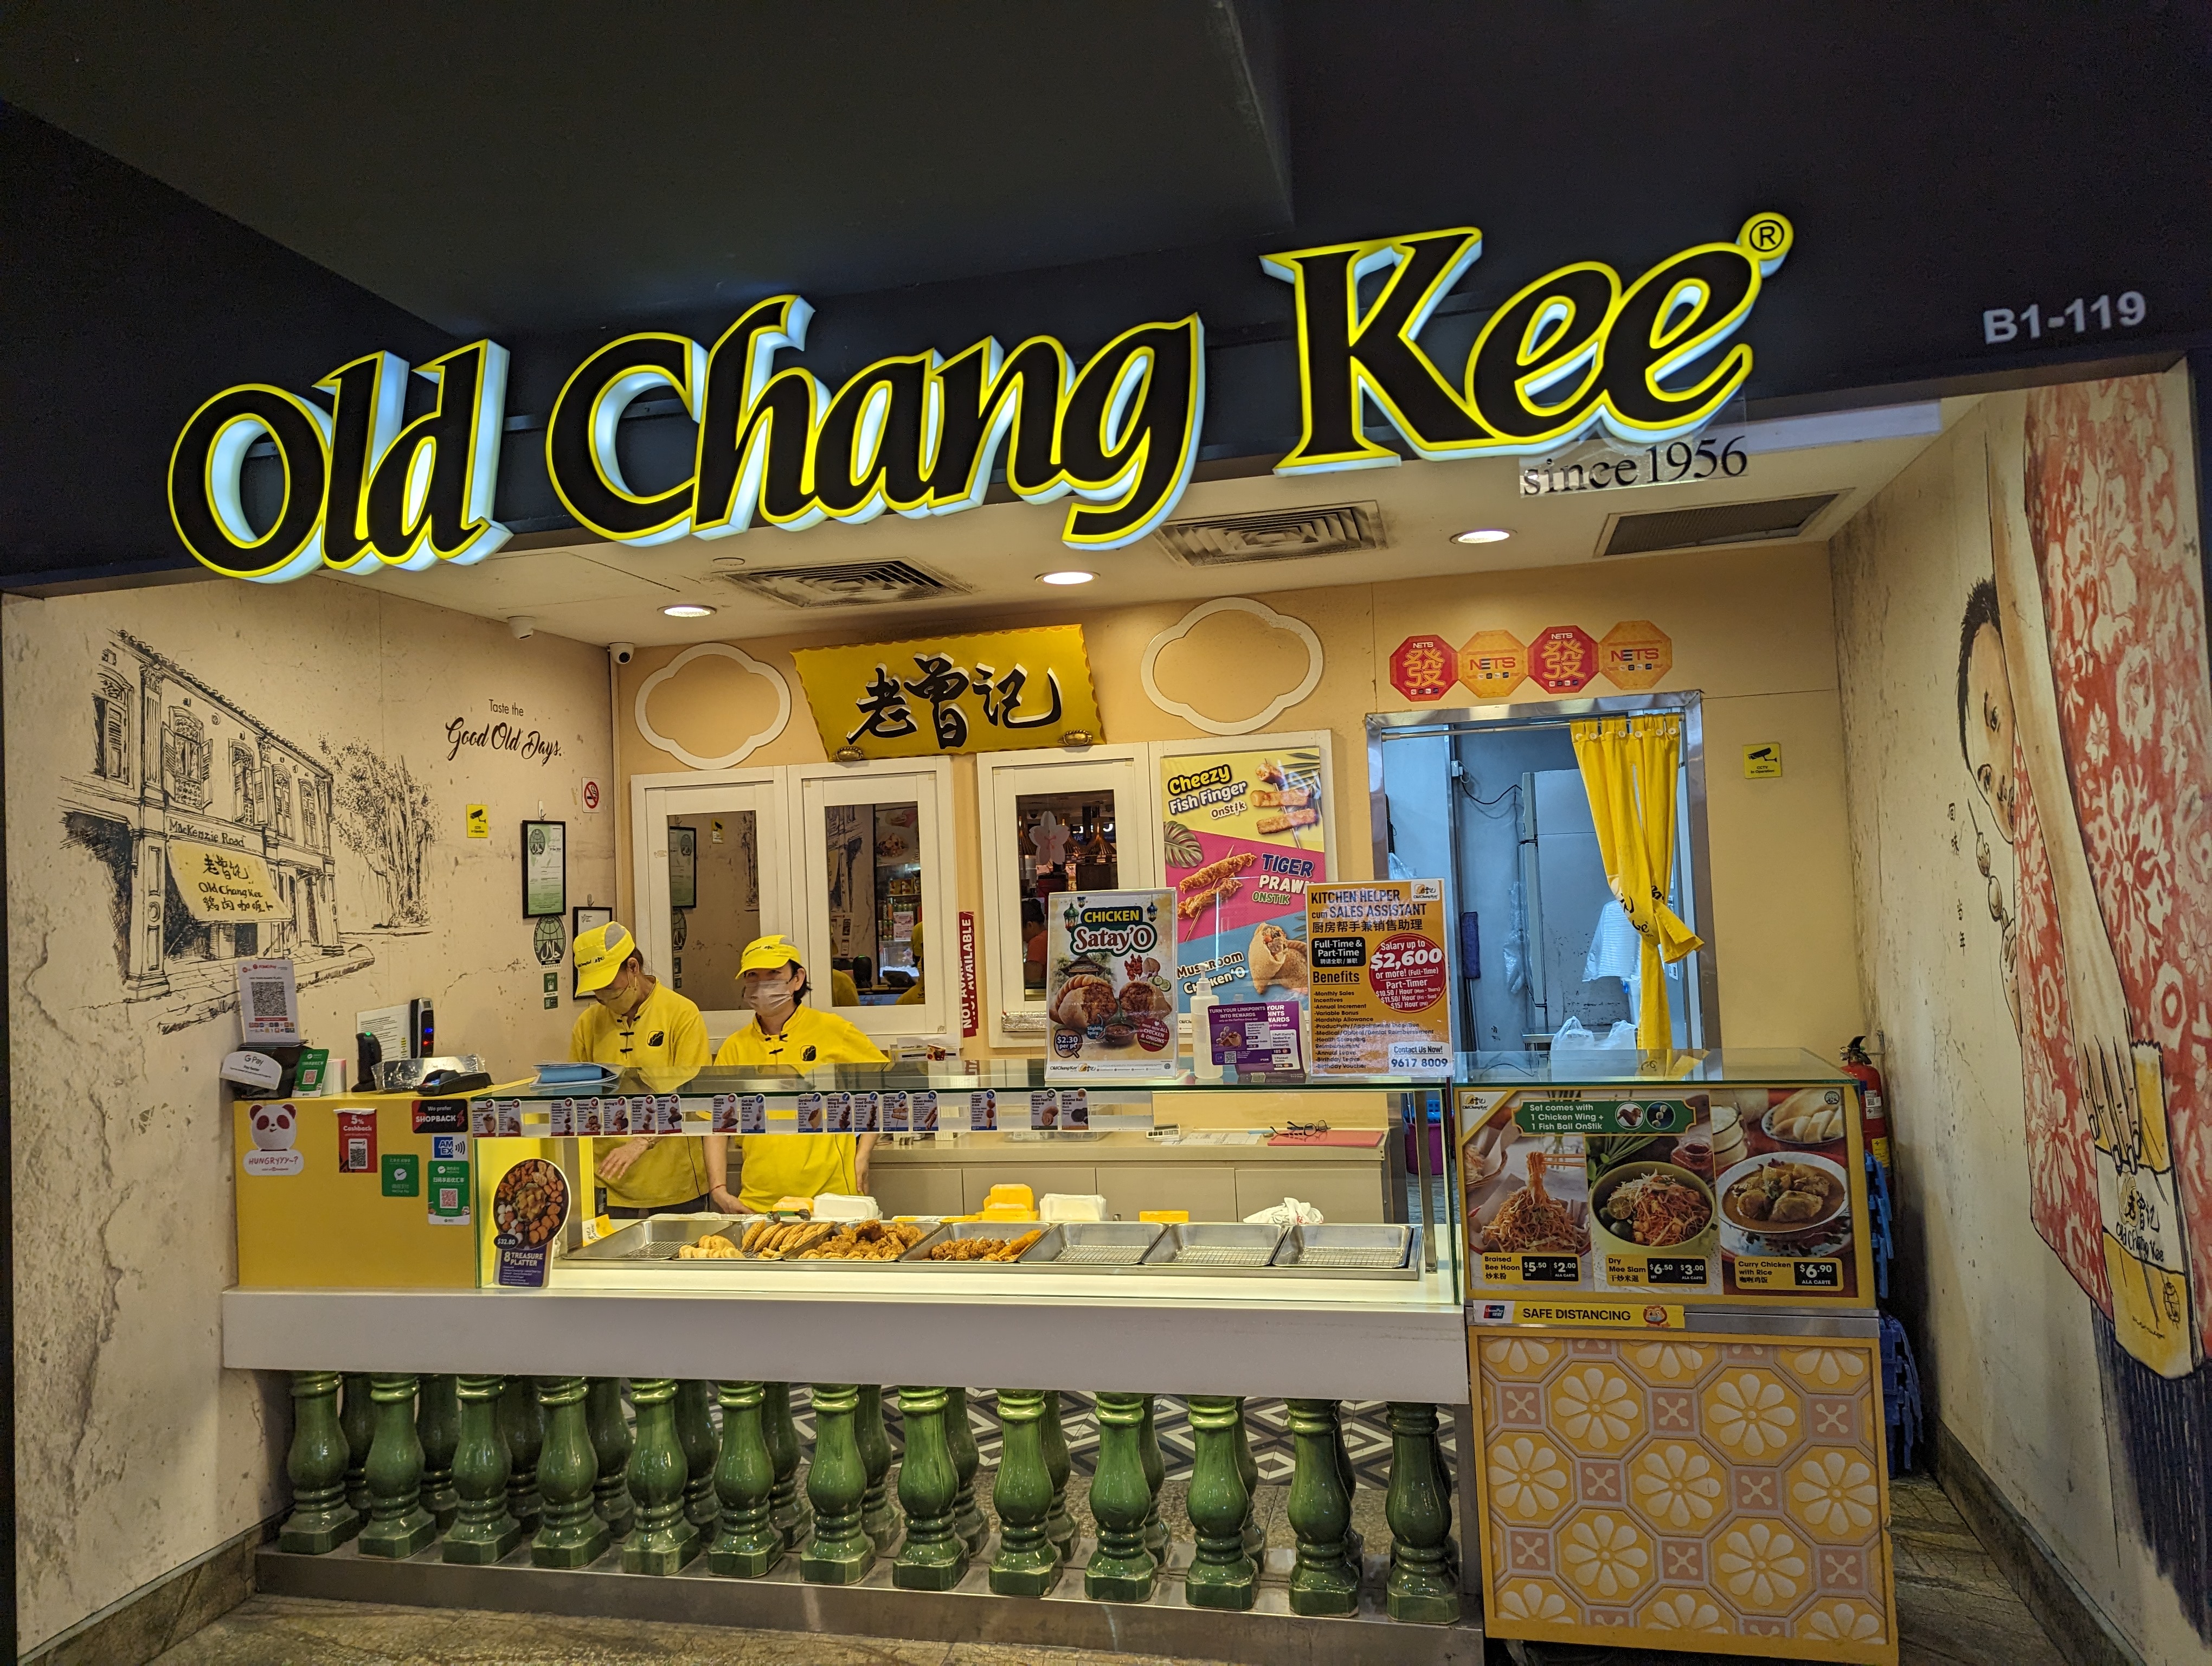 Your personal guide to Old Chang Kee - Singapore’s local snack spot